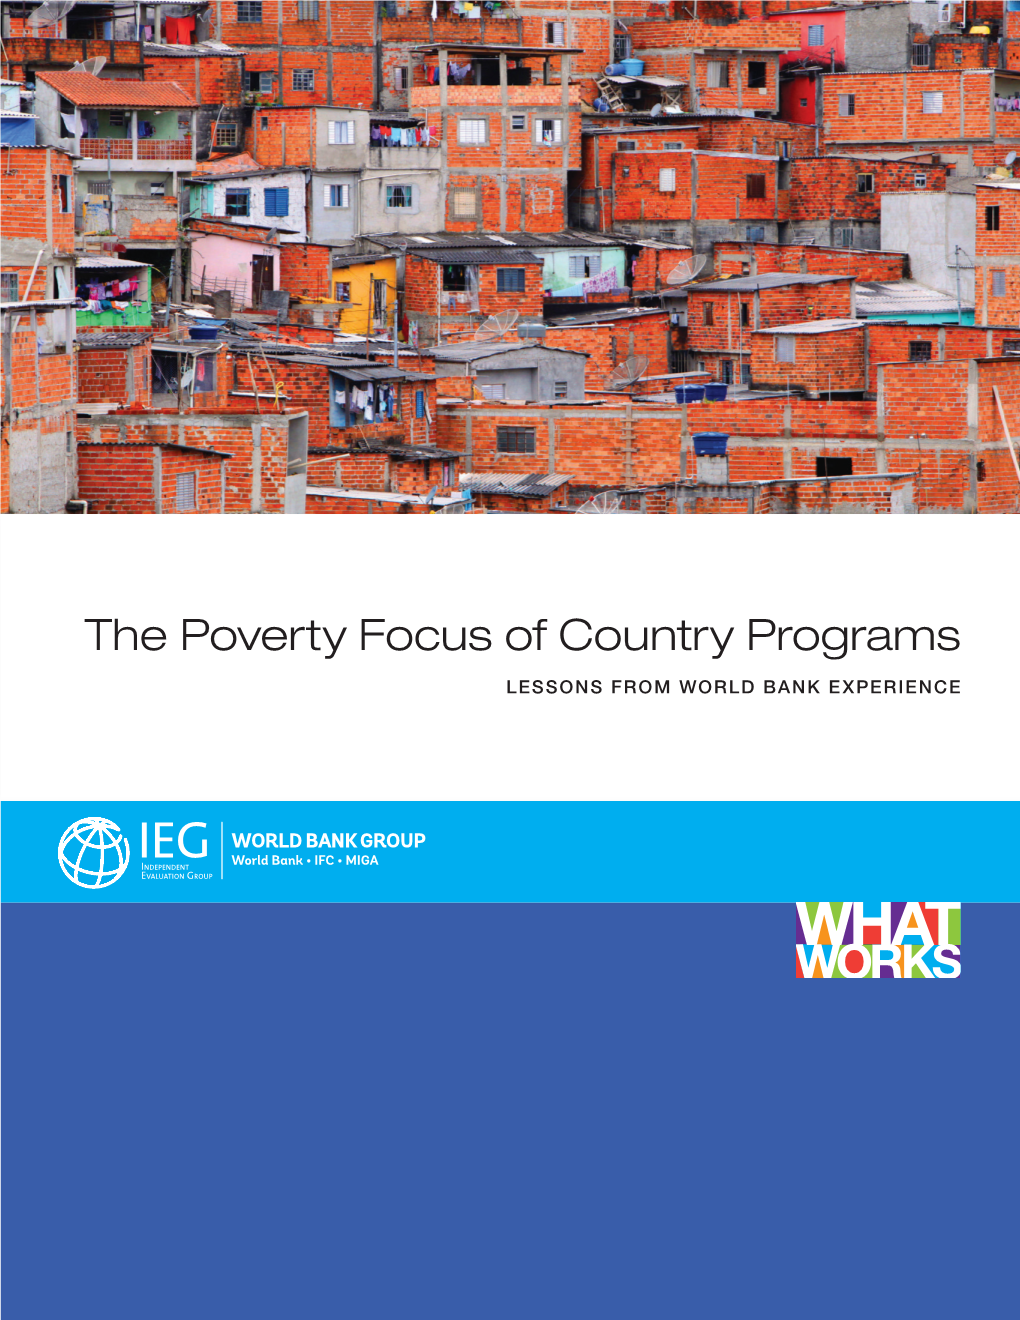 The Poverty Focus of Country Programs